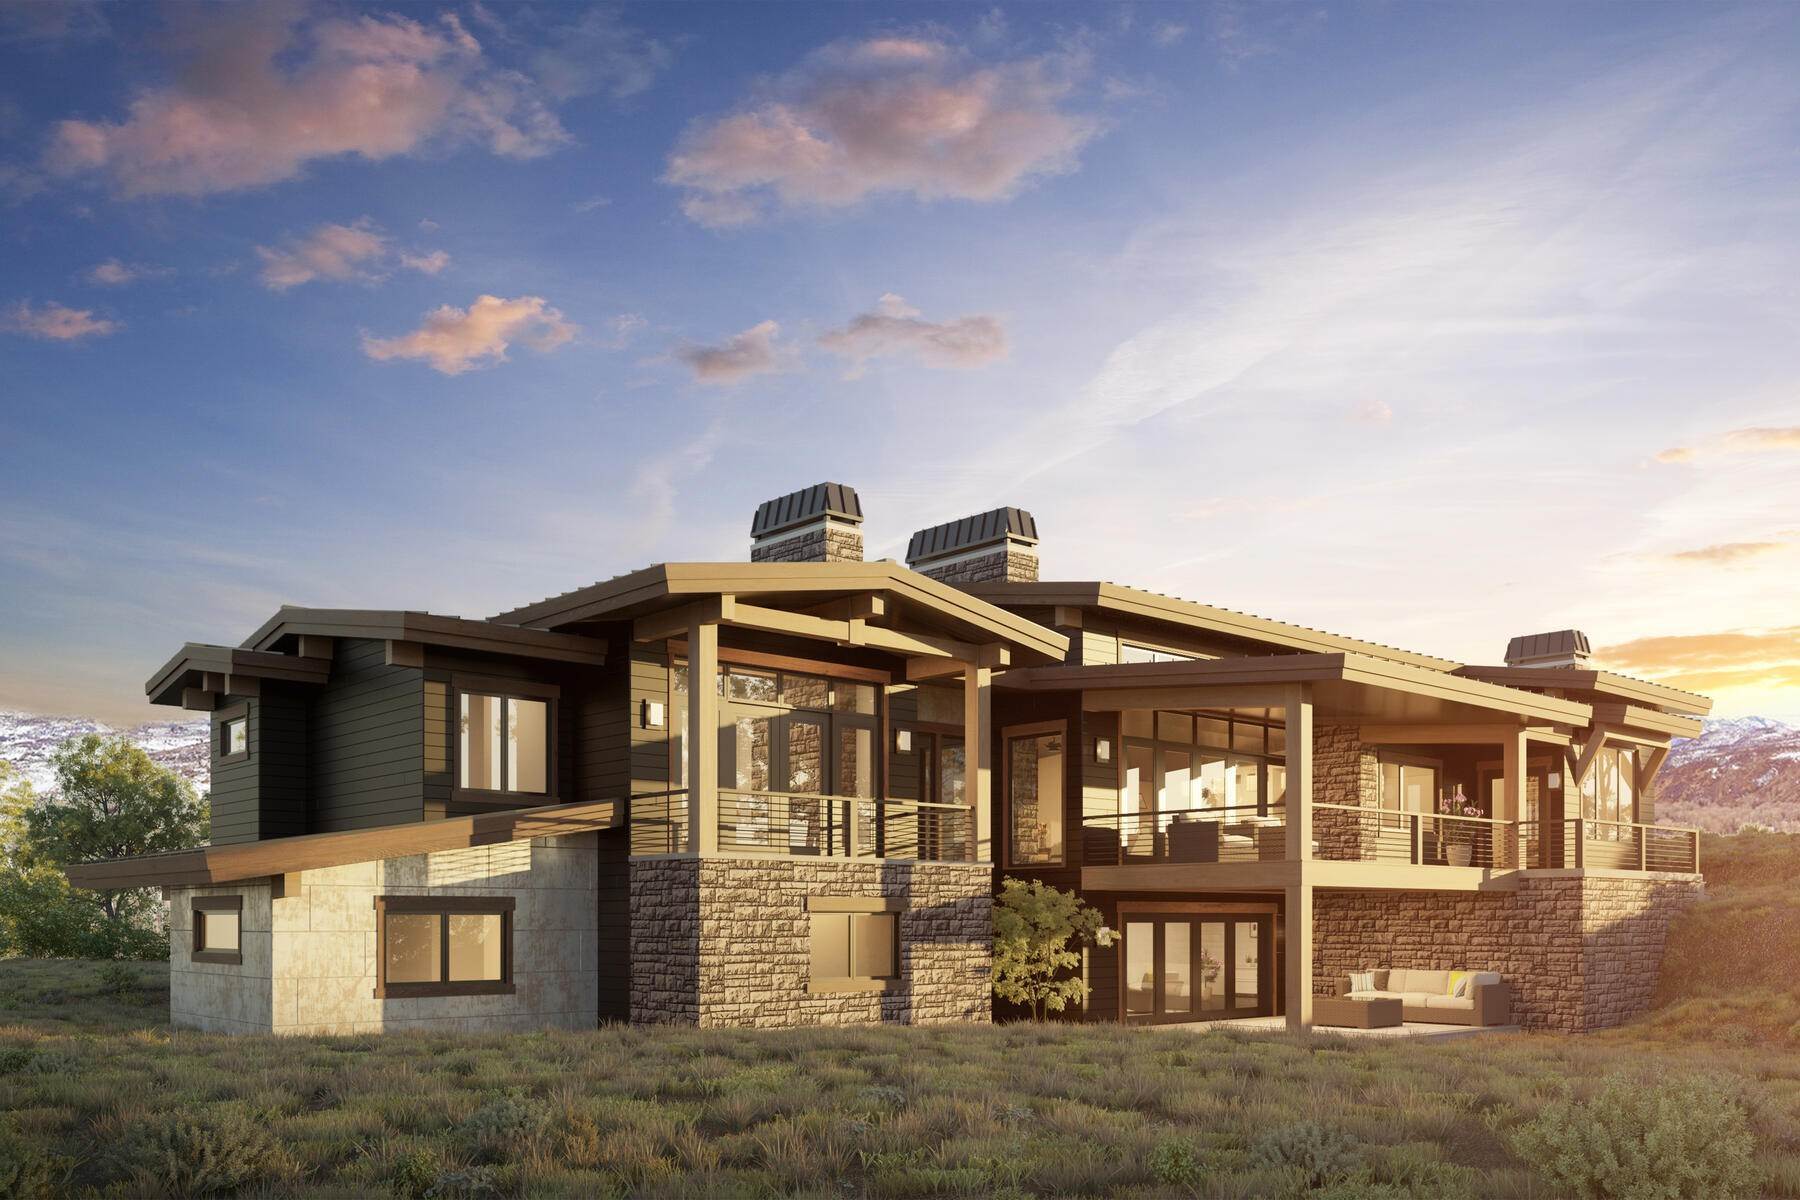 Single Family Homes for Sale at Outdoor adventure is at your doorstep with this new construction home! 5925 E Caddis Circle Heber City, Utah 84032 United States